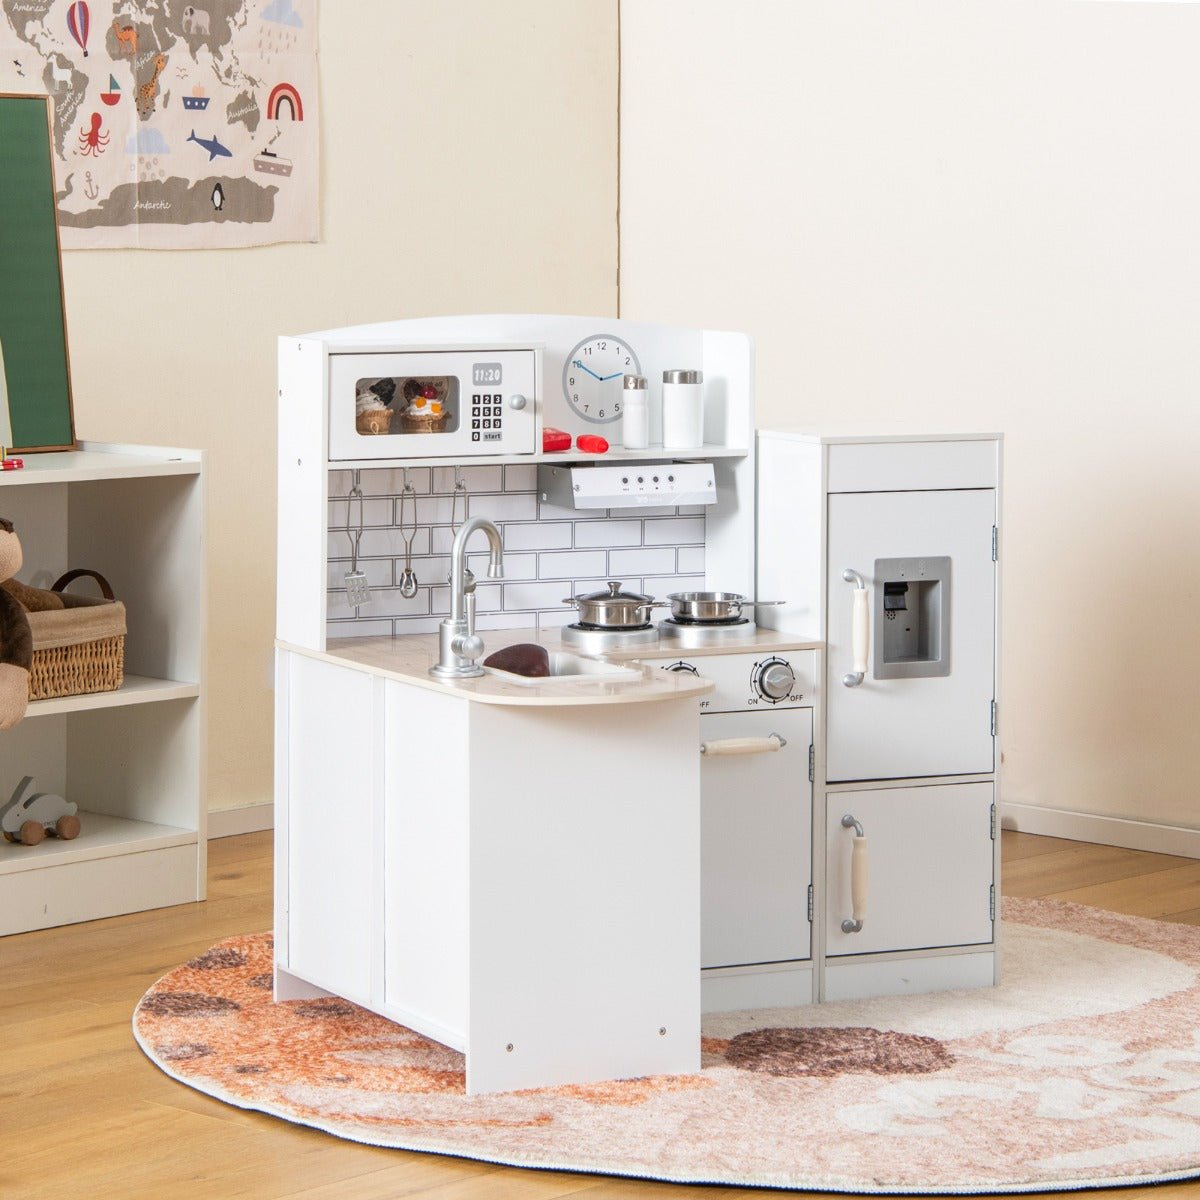 Kids Cooking Playset: Toy with Microwave & Fridge for Imaginative Play